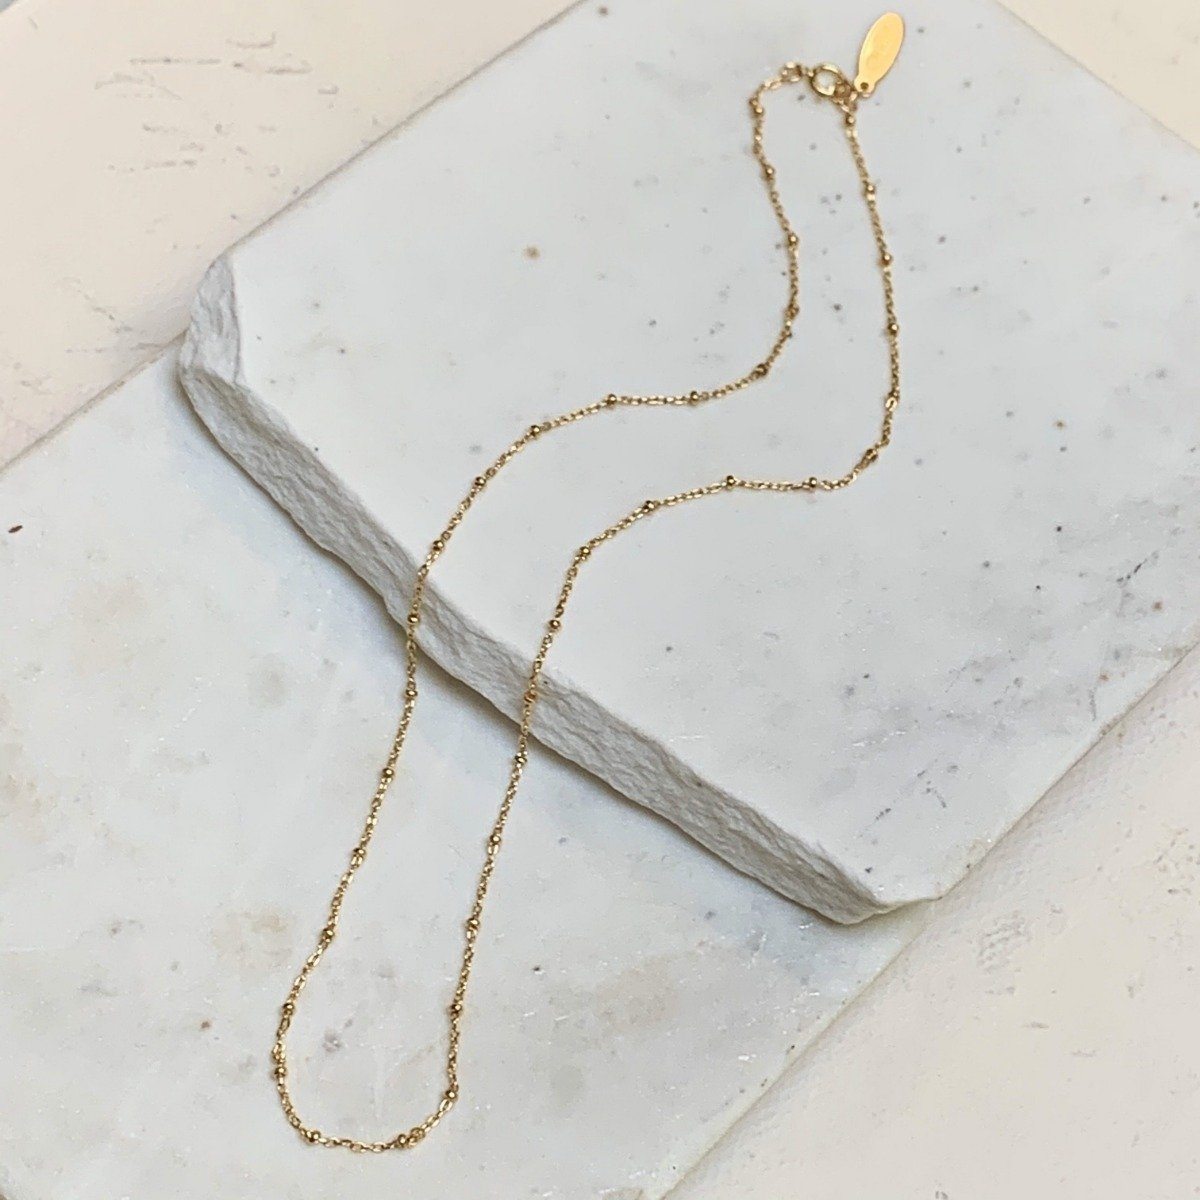 Figure-8 Chain Necklace - curvy infinity chain necklace made to order - Foamy Wader